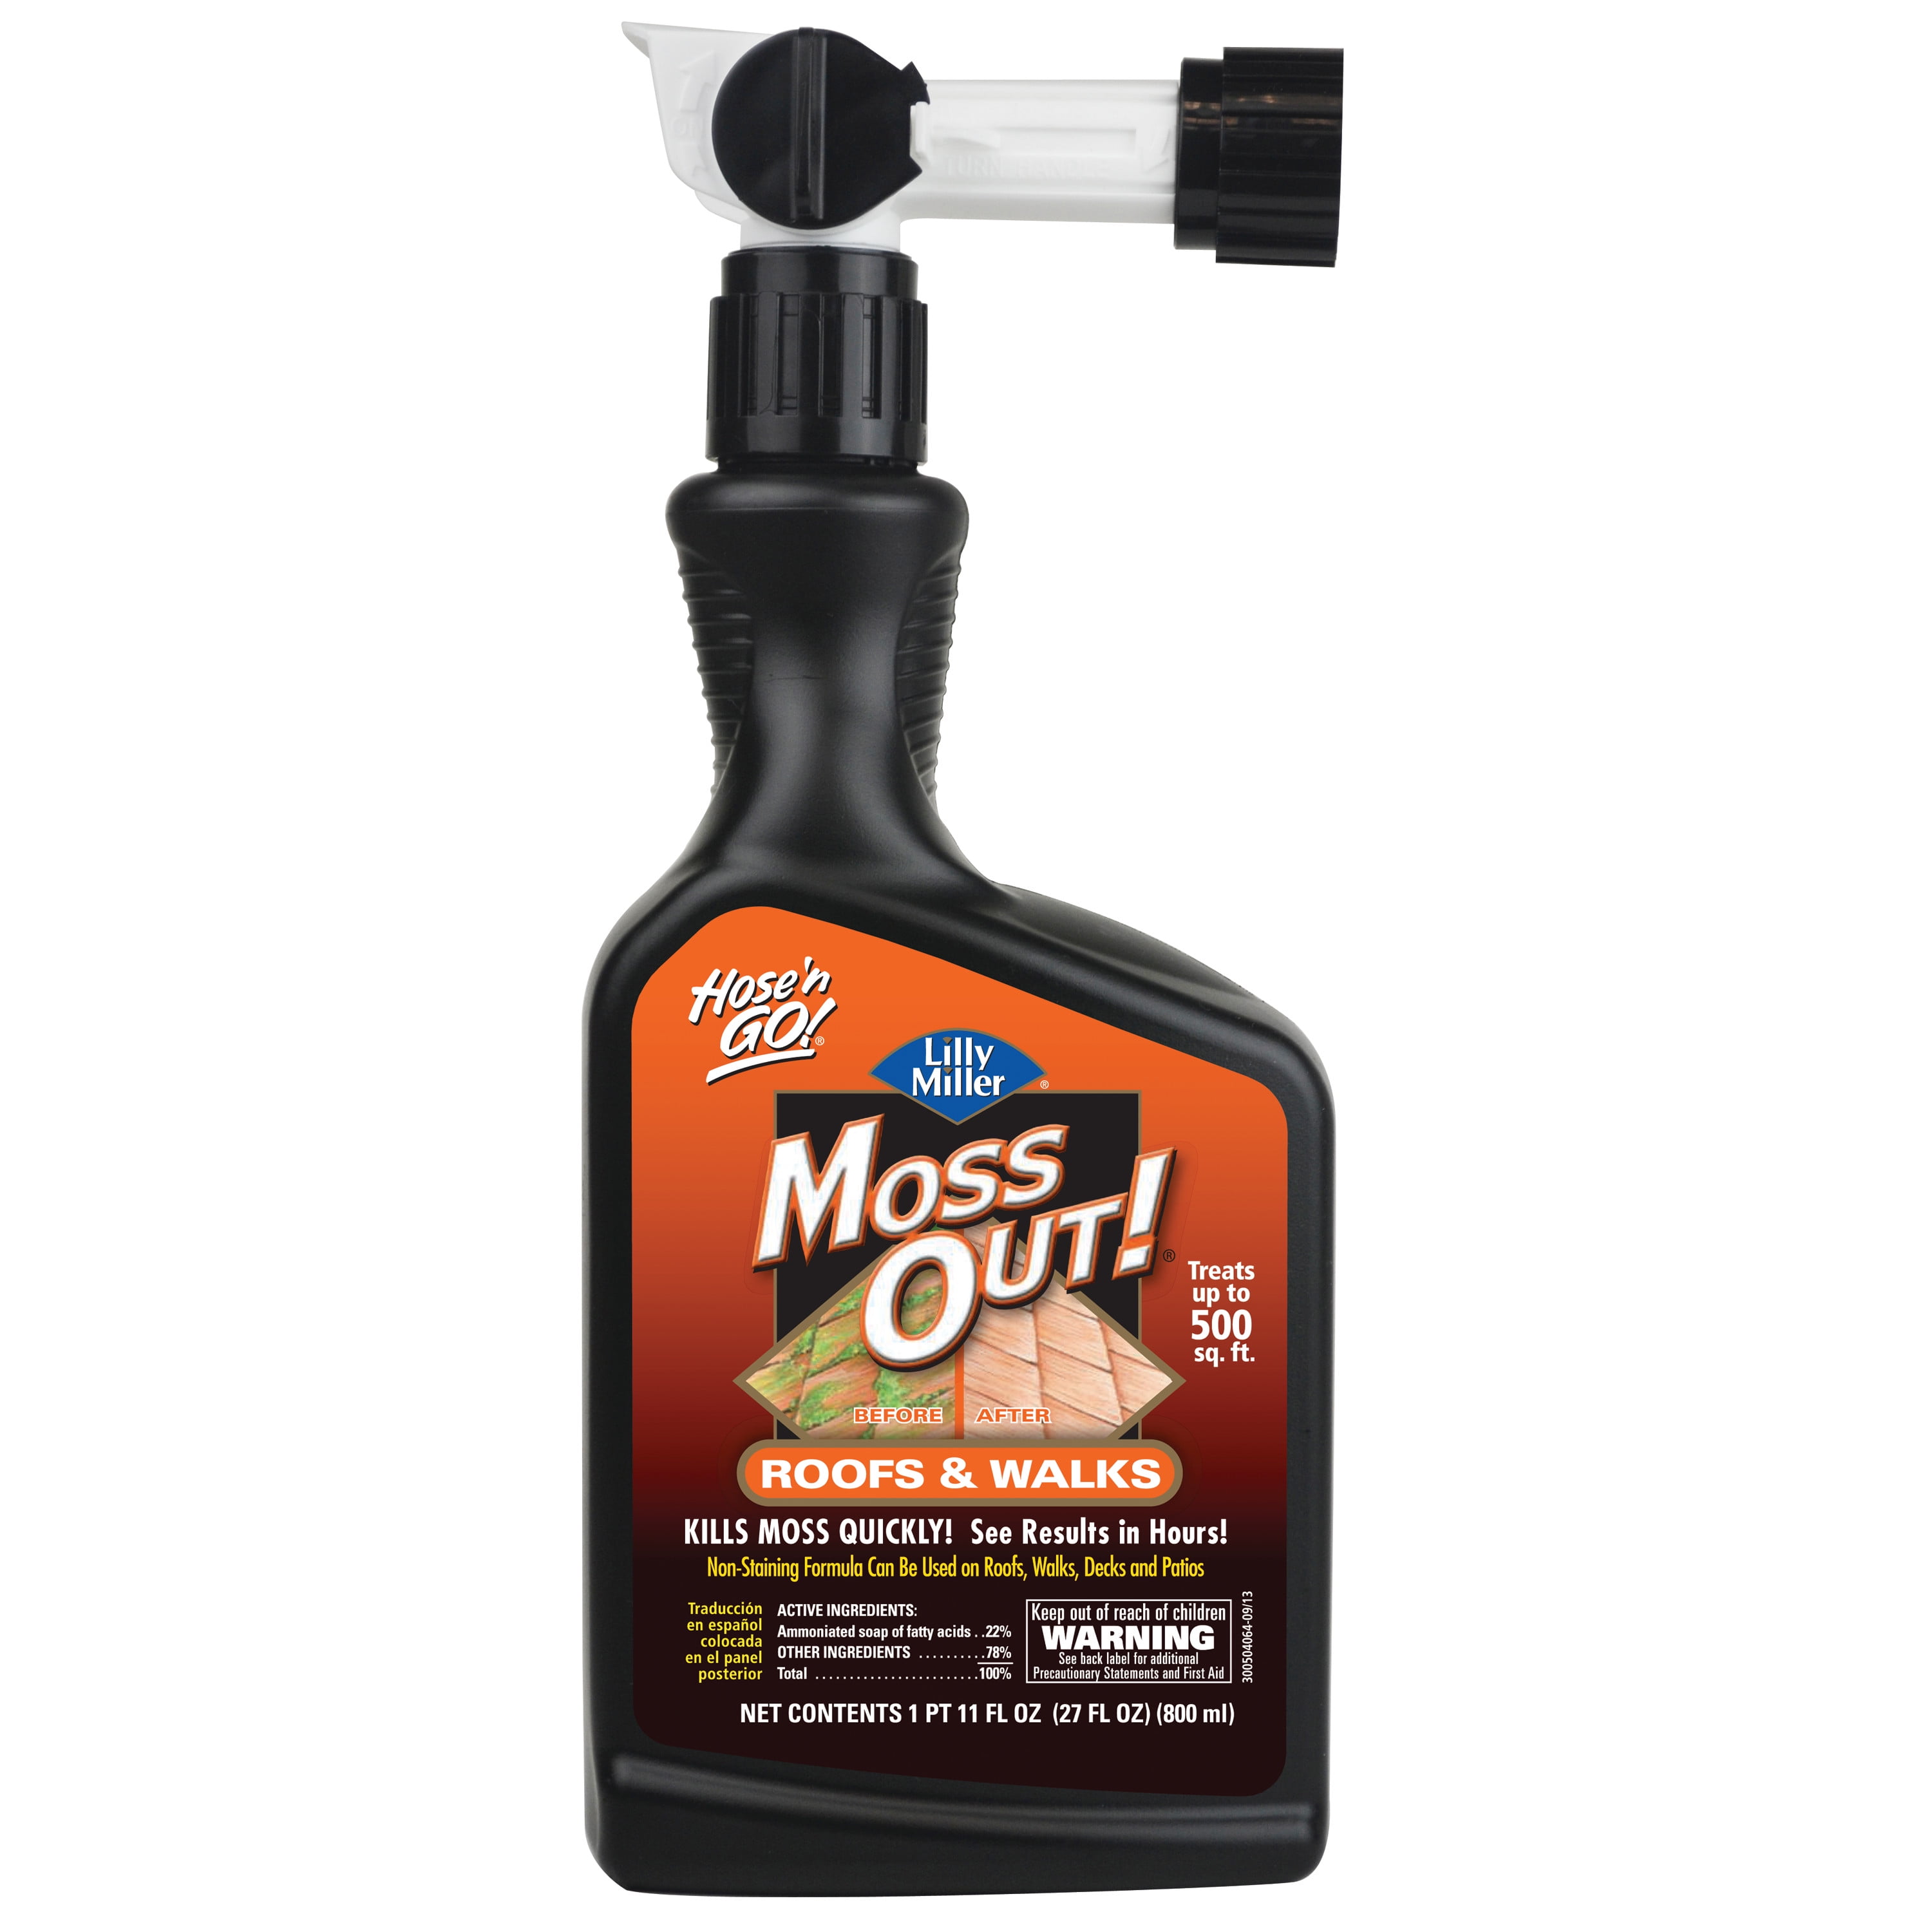 Lilly Miller Moss Out! RTS Liquid for Roofs and Walks Moss Killer, Herbicide, 27 oz.